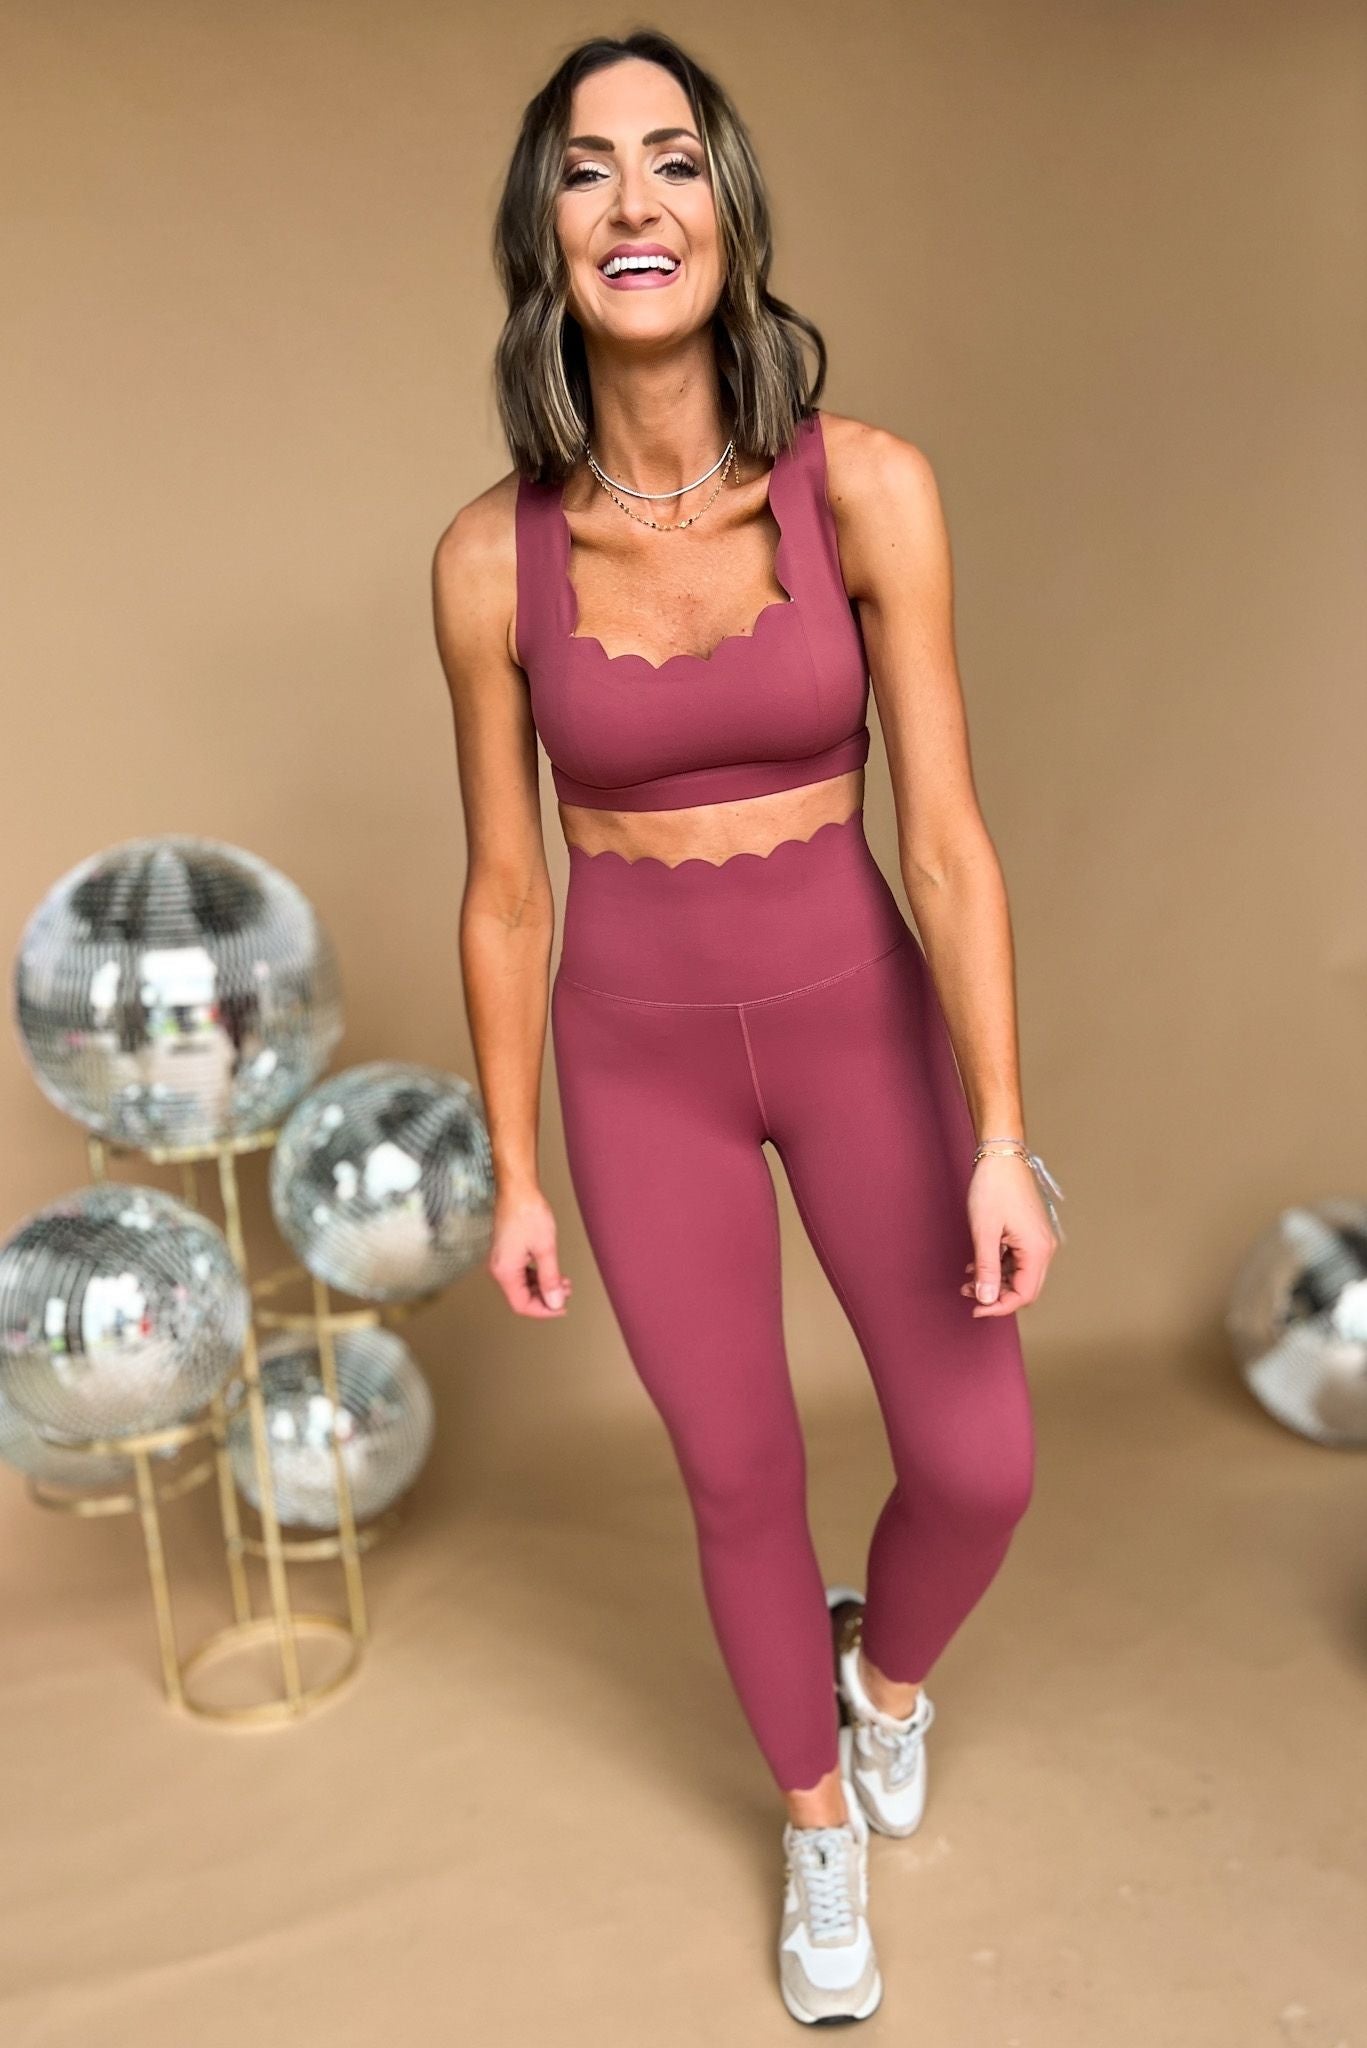 Load image into Gallery viewer, Rose Scallop Edge Criss Cross Back Sports Bra SSYS The Label, athleisure, must have, mom style, chic, everyday wear, shop style your senses by mallory ftizsimmons
